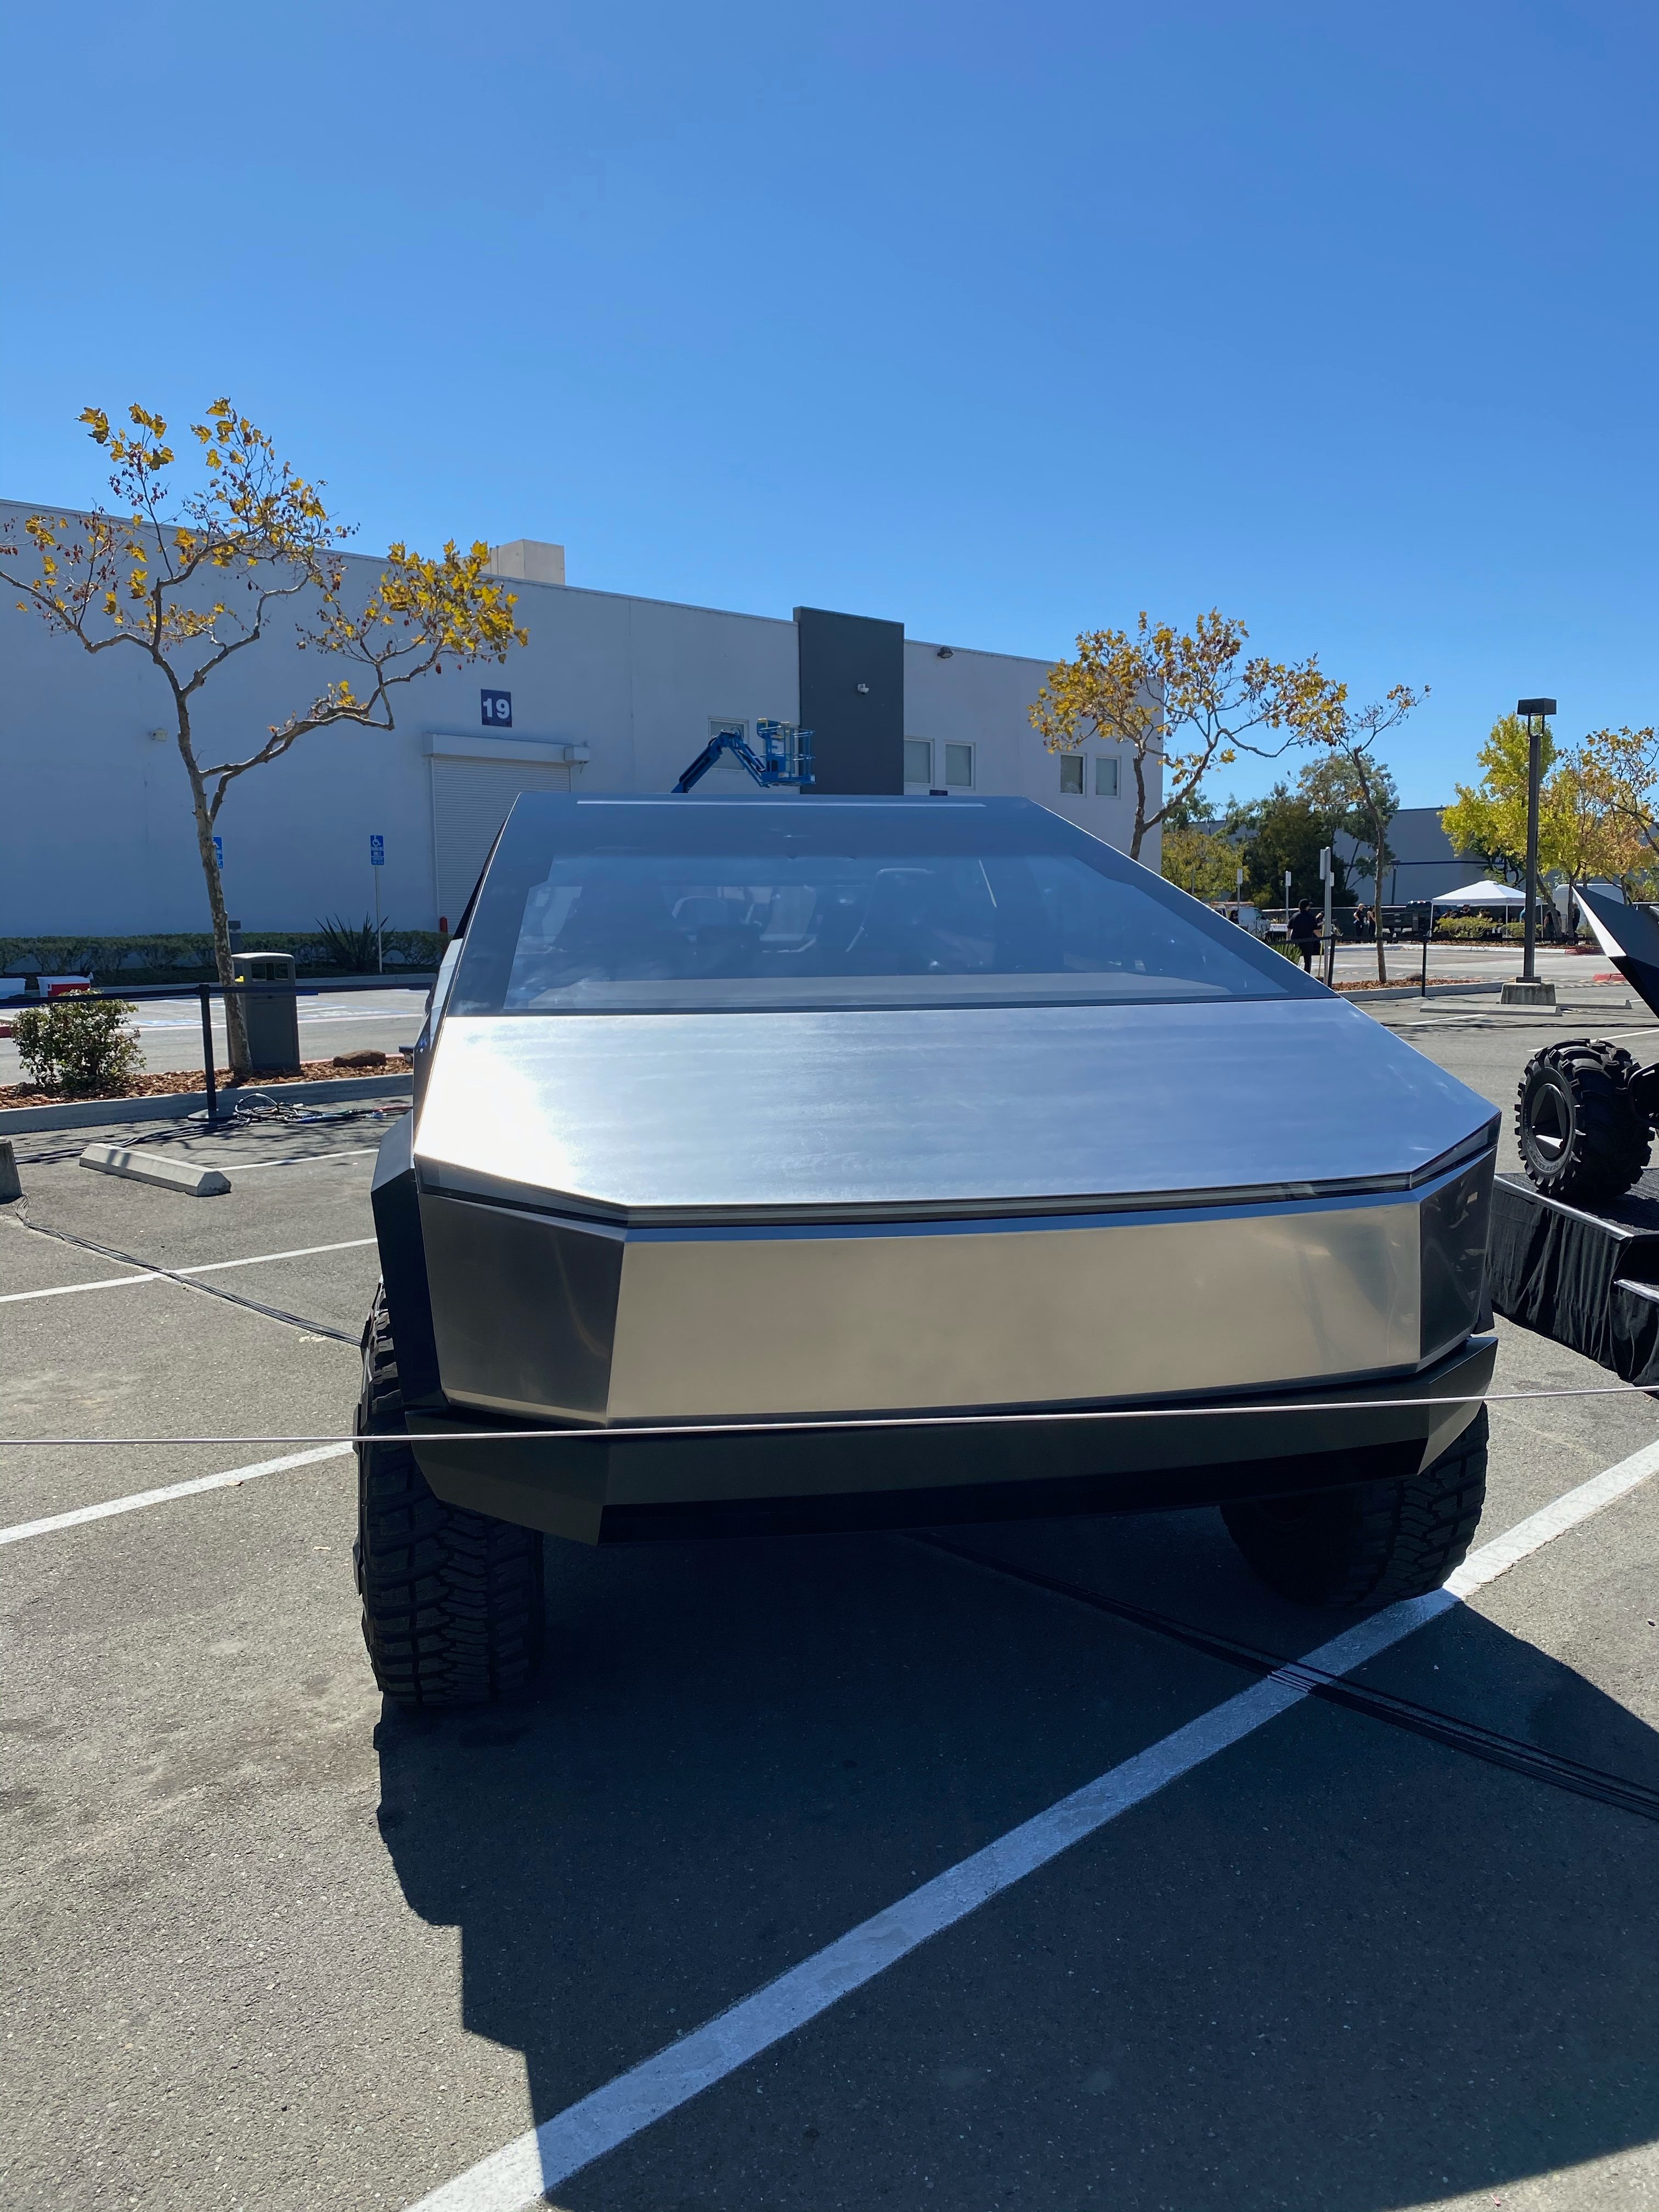 Tesla brings Roadster, Cybertruck prototypes and more to Battery Day